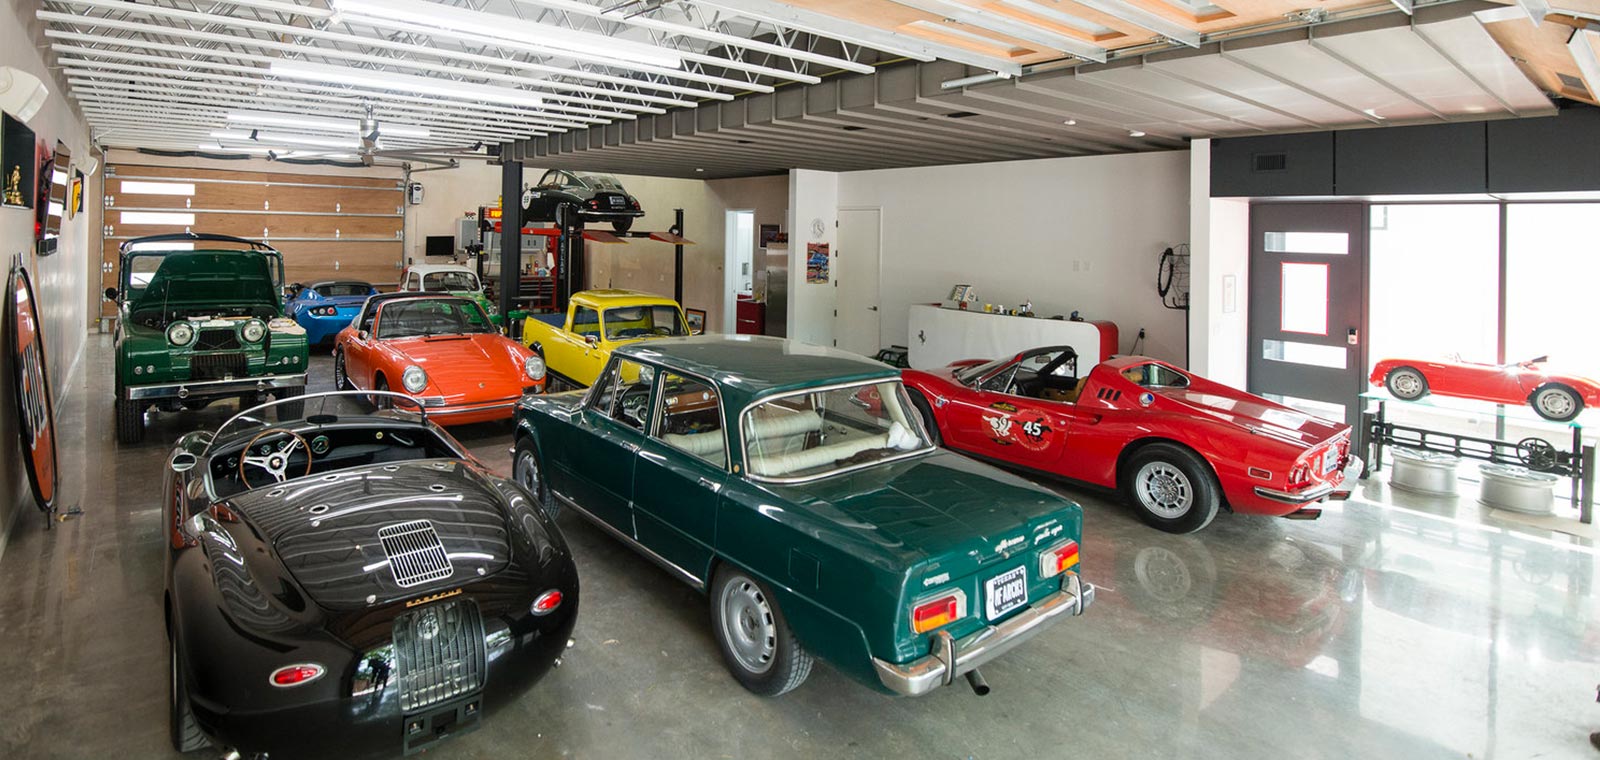 Austin home designed to showcase the owners' vintage car collection